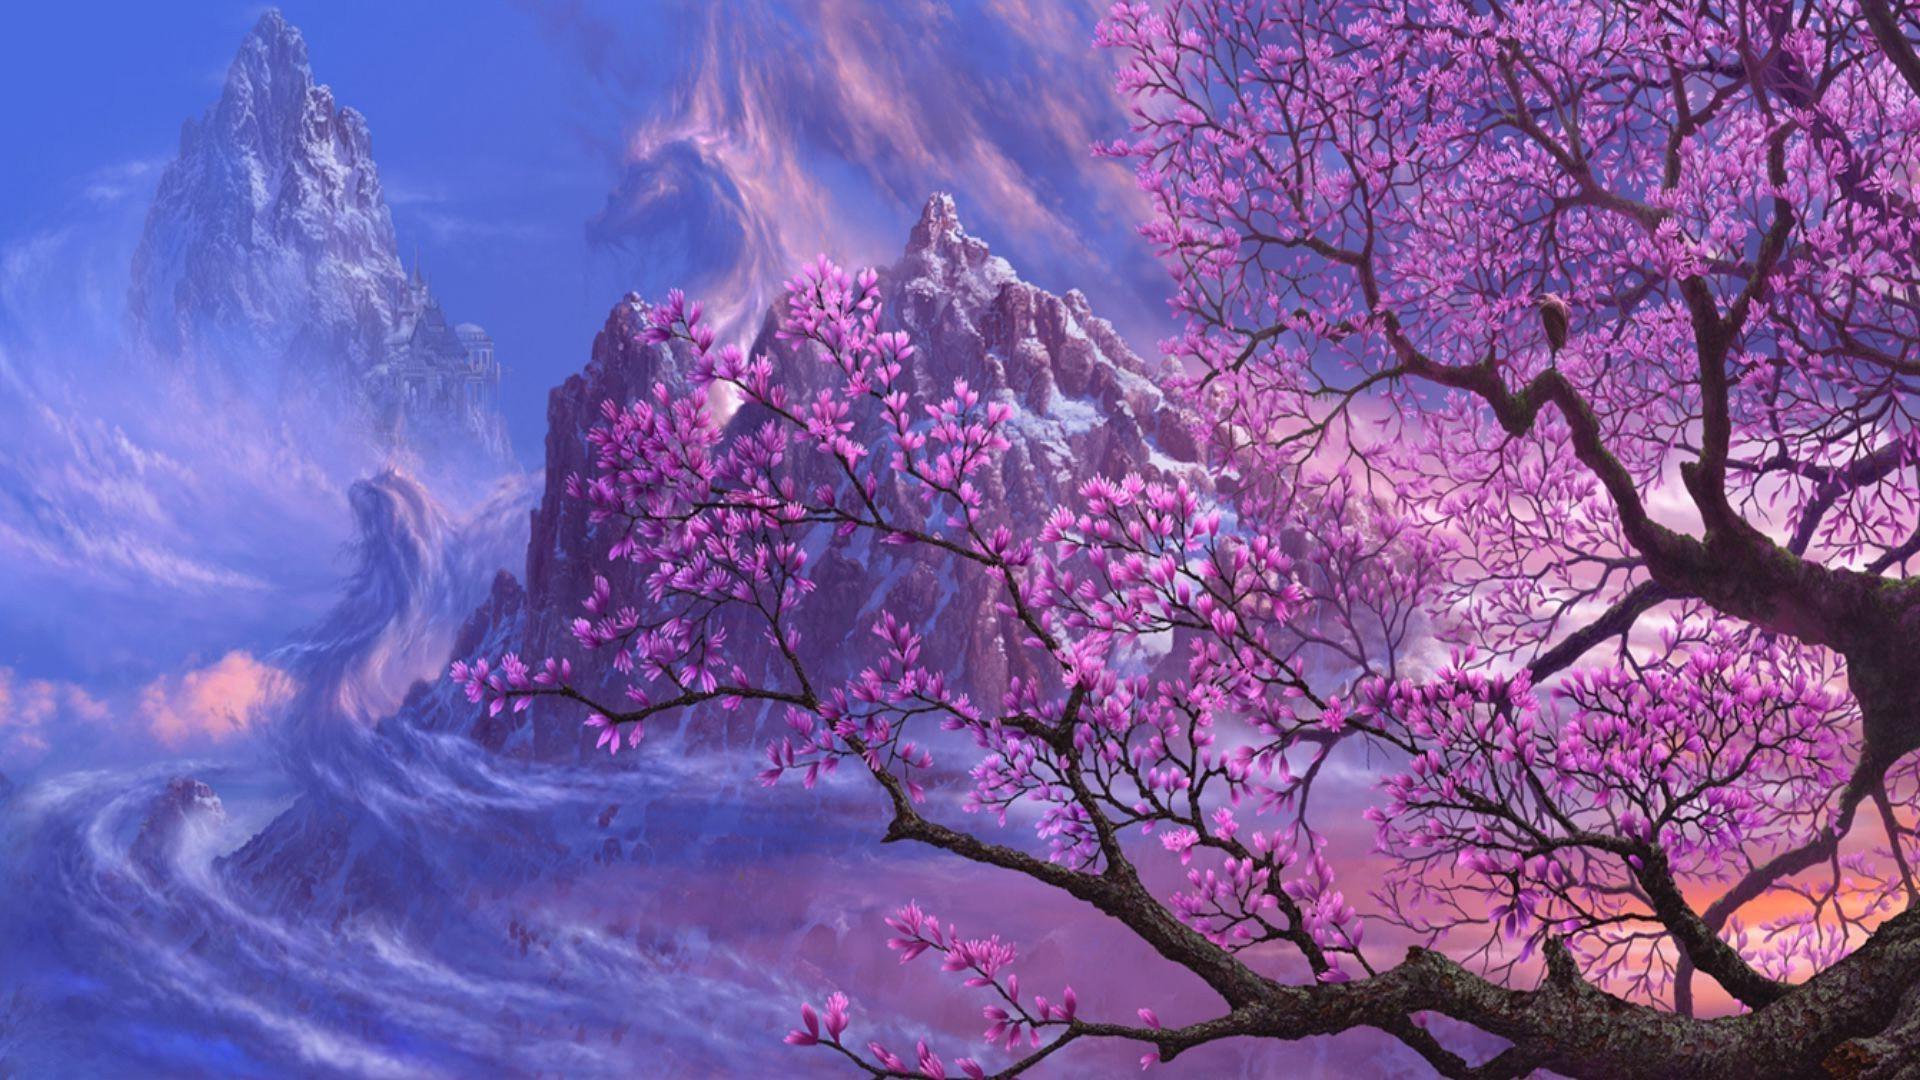 Magnolia tree in the icy mountains Wallpaper